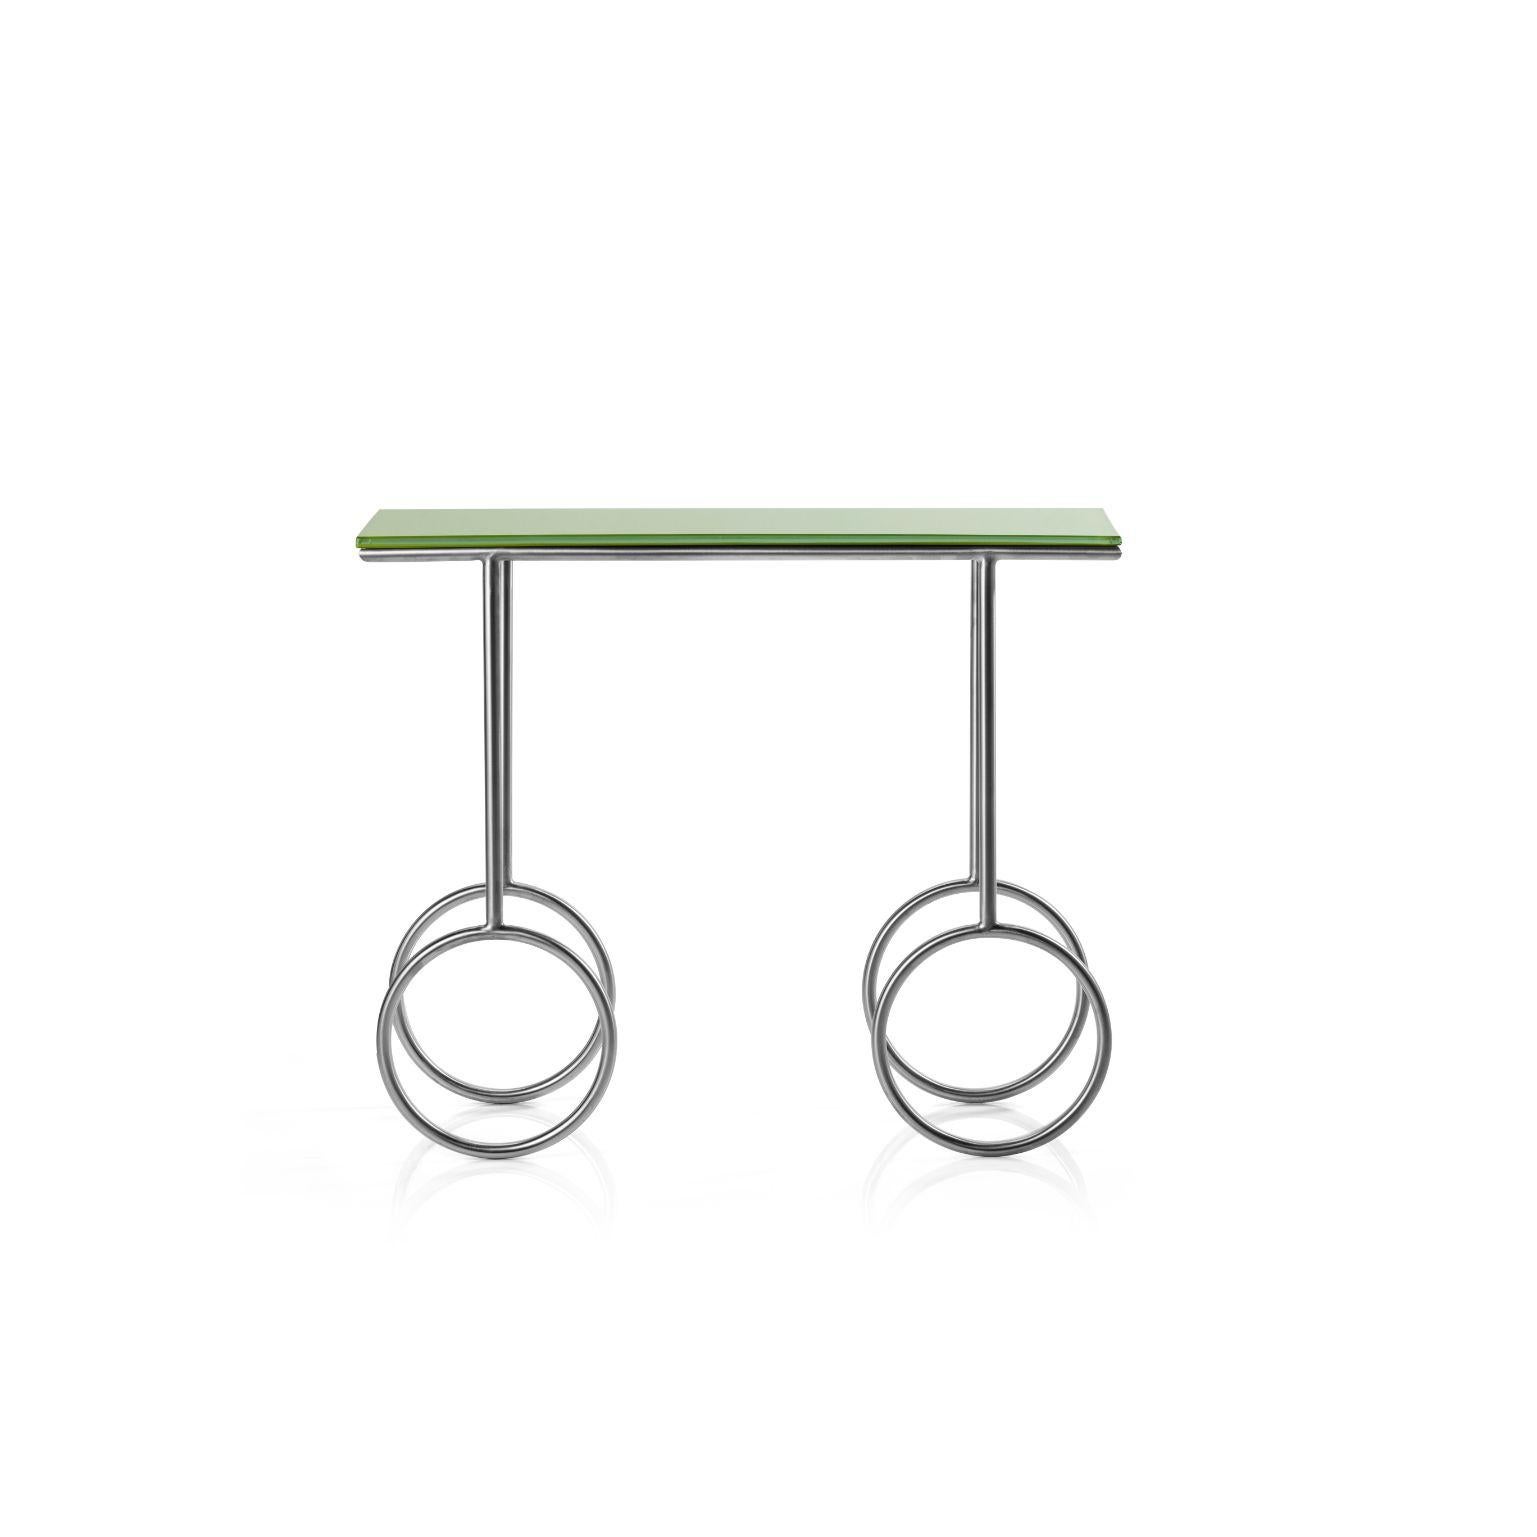 Olivia - Table by Cultivado Em Casa
Dimensions: 70 x 25 x 49 cm
Materials: Stainless steel and lacquered glass.

A light and harmonious design, marked by the delicacy of the feet. A table that evokes female forms, valued from different